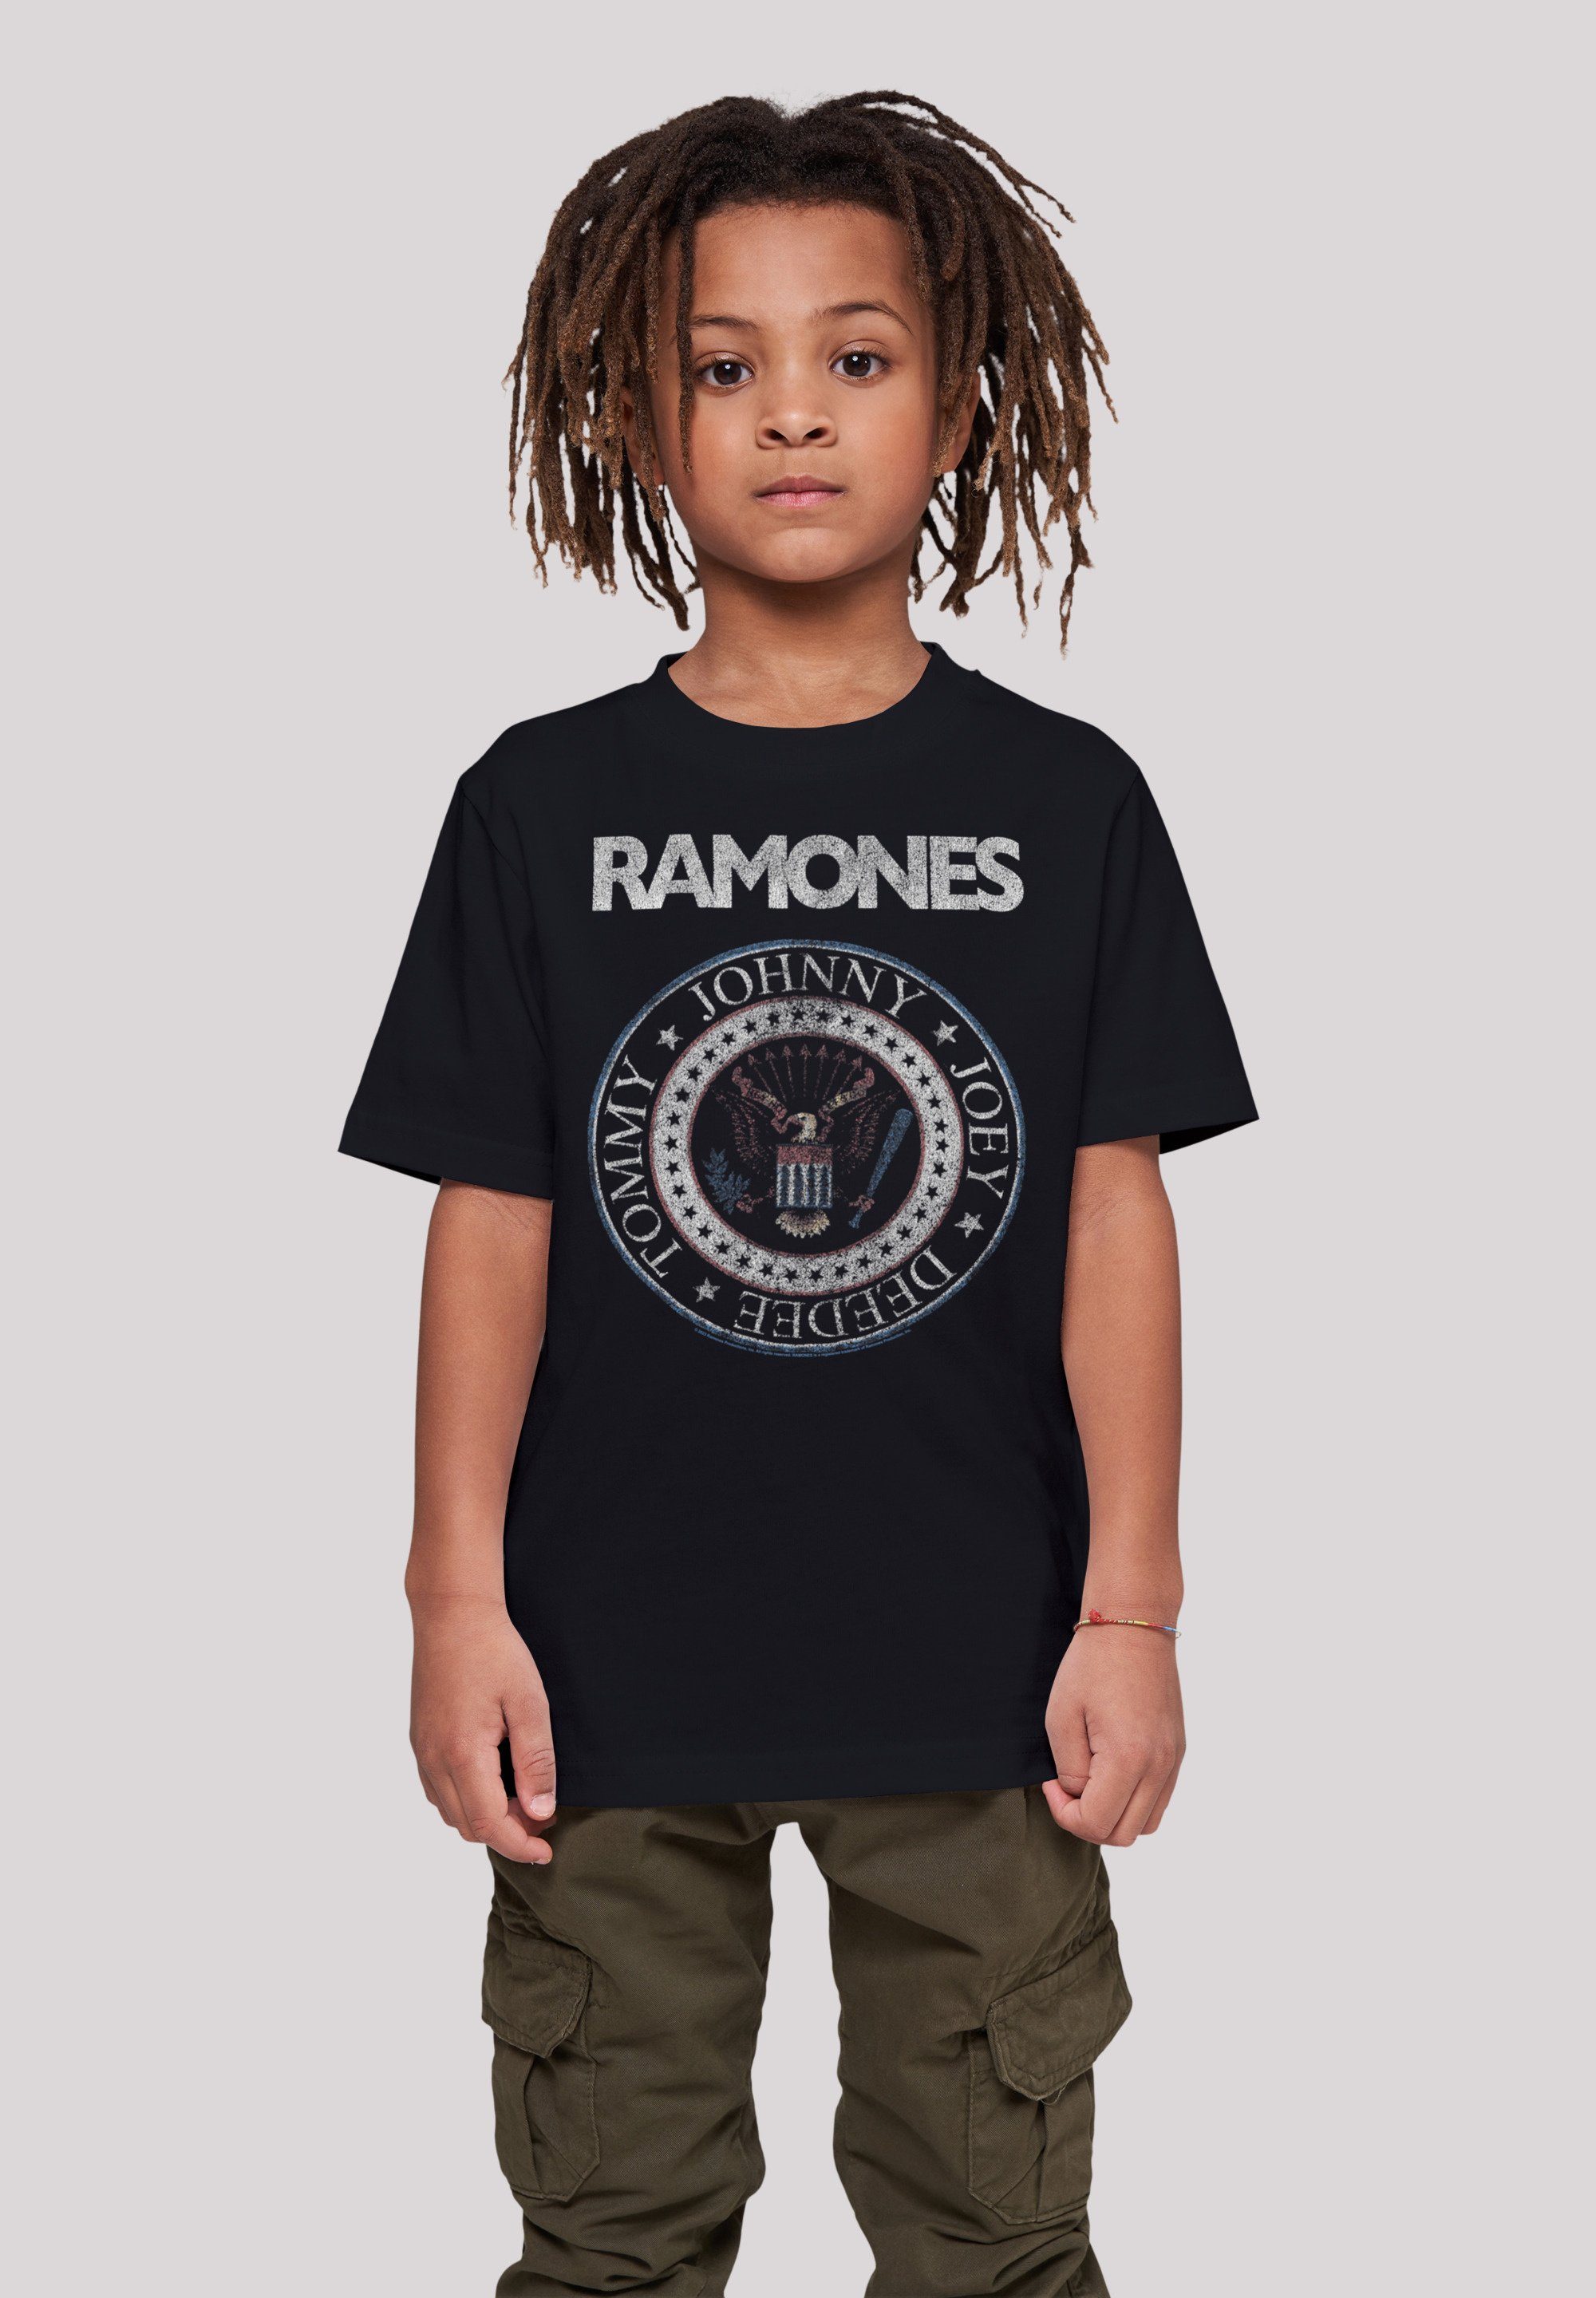 Red Rock Seal Musik Band, And Qualität, F4NT4STIC Band Ramones Rock-Musik T-Shirt White Premium